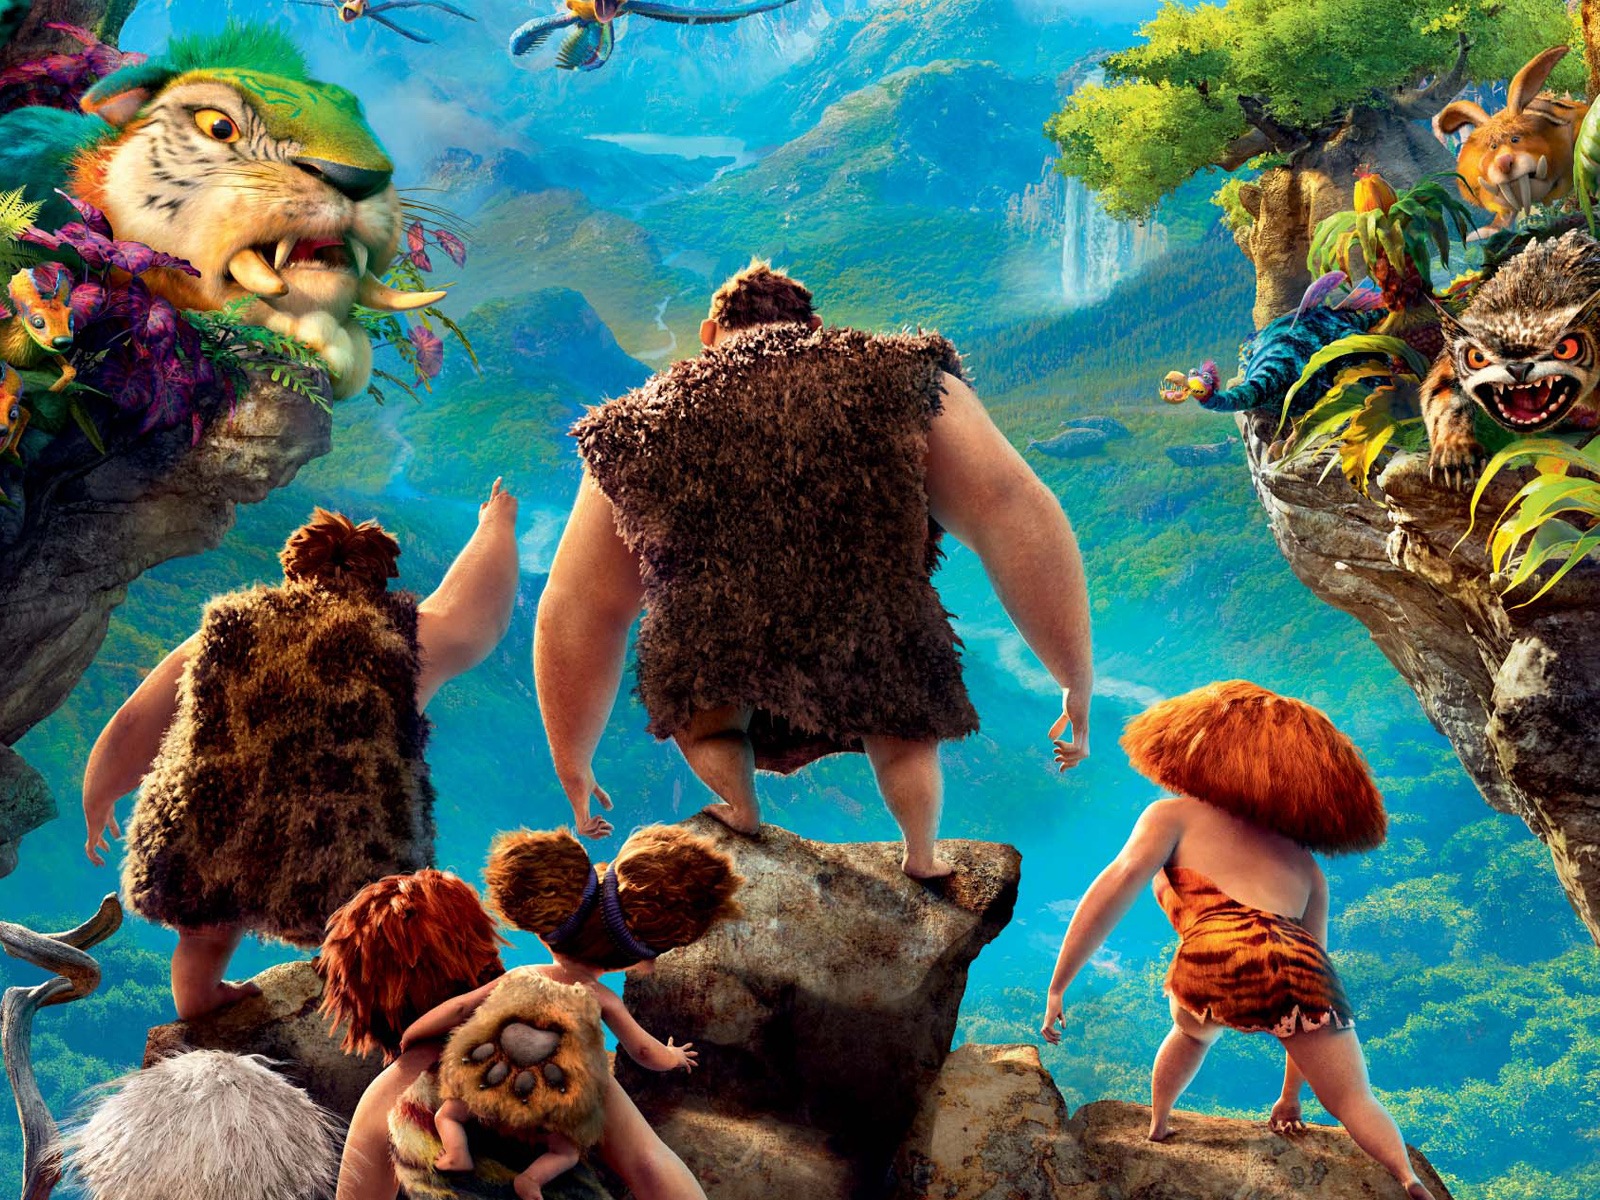 V Croods HD Movie Wallpapers #5 - 1600x1200